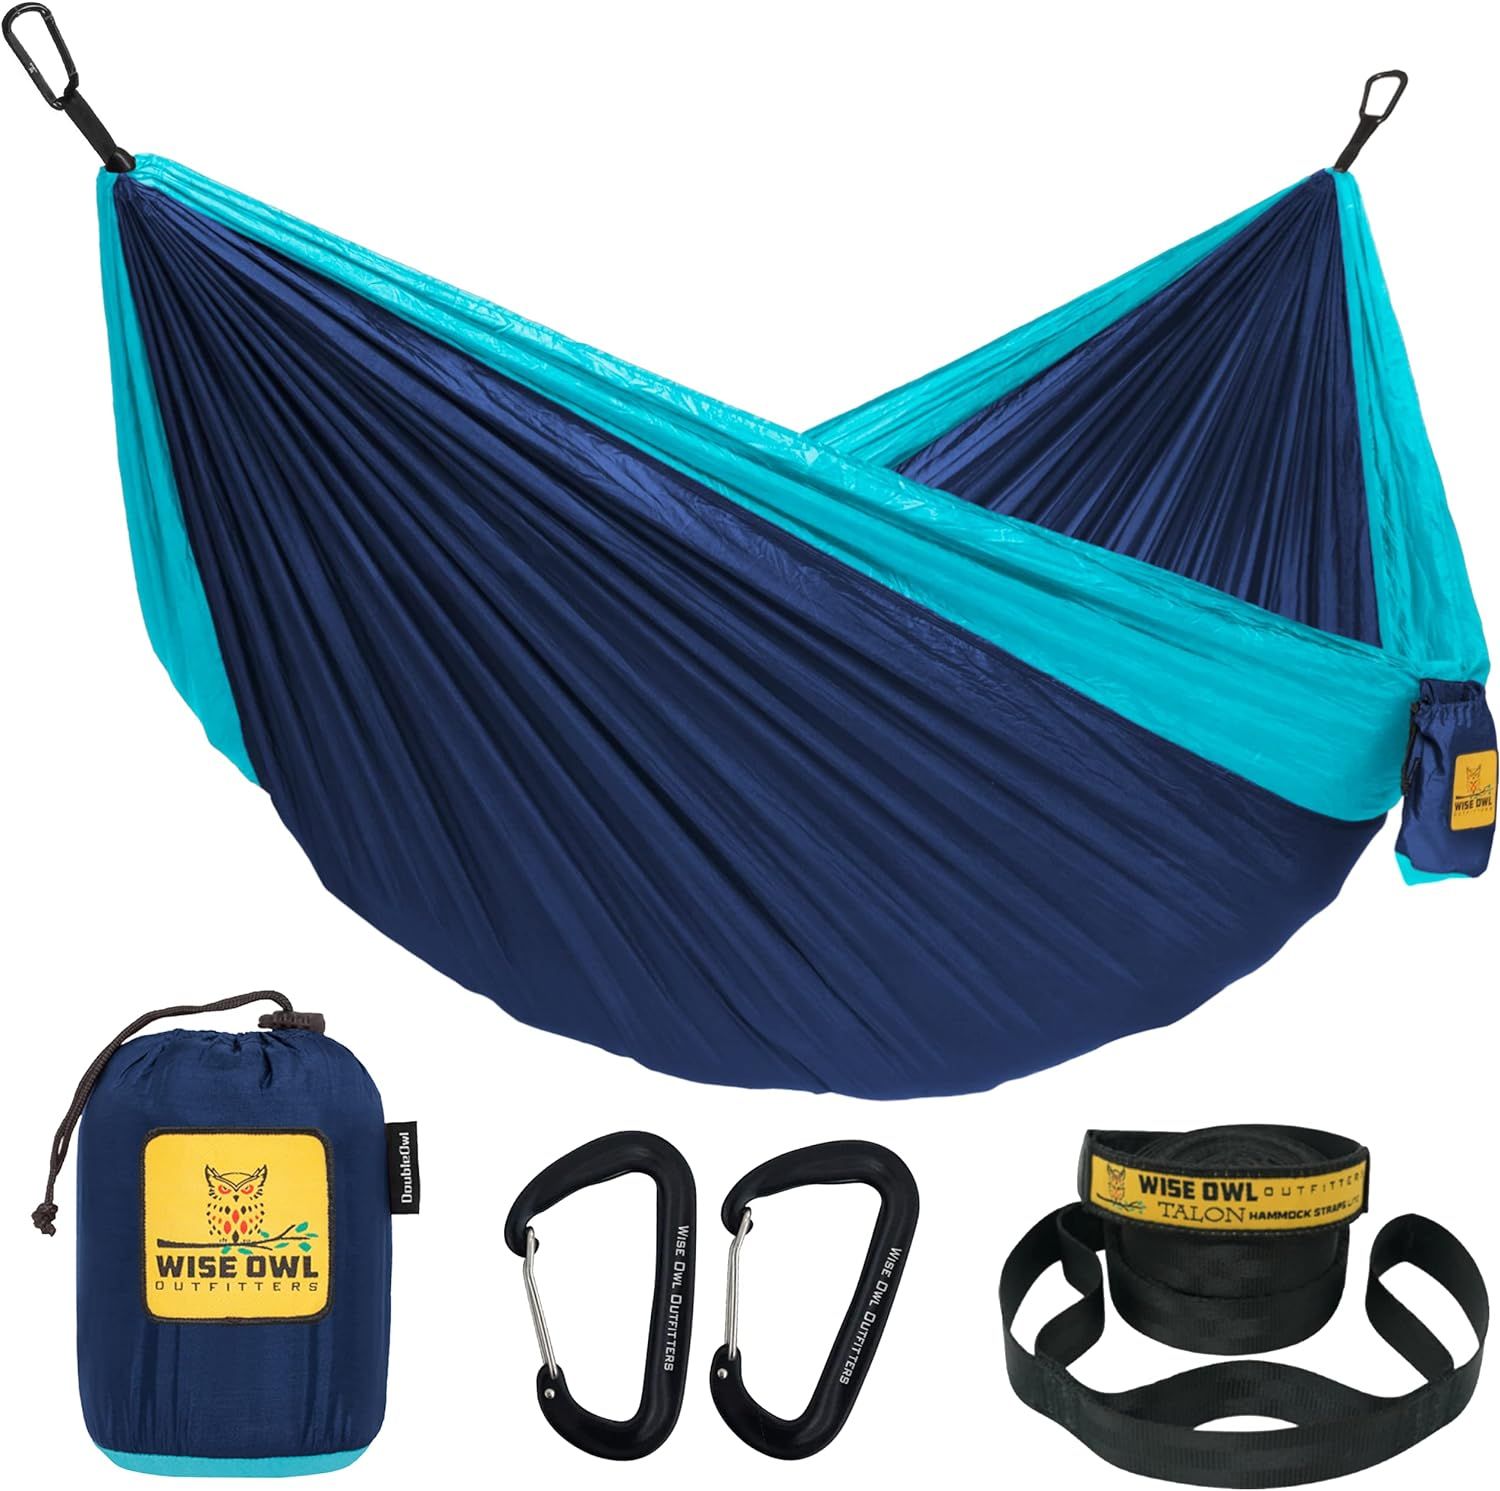 Wise Owl Outfitters Camping Hammock - Camping Essentials, Portable Hammock w/Tree Straps, Single ... | Amazon (US)